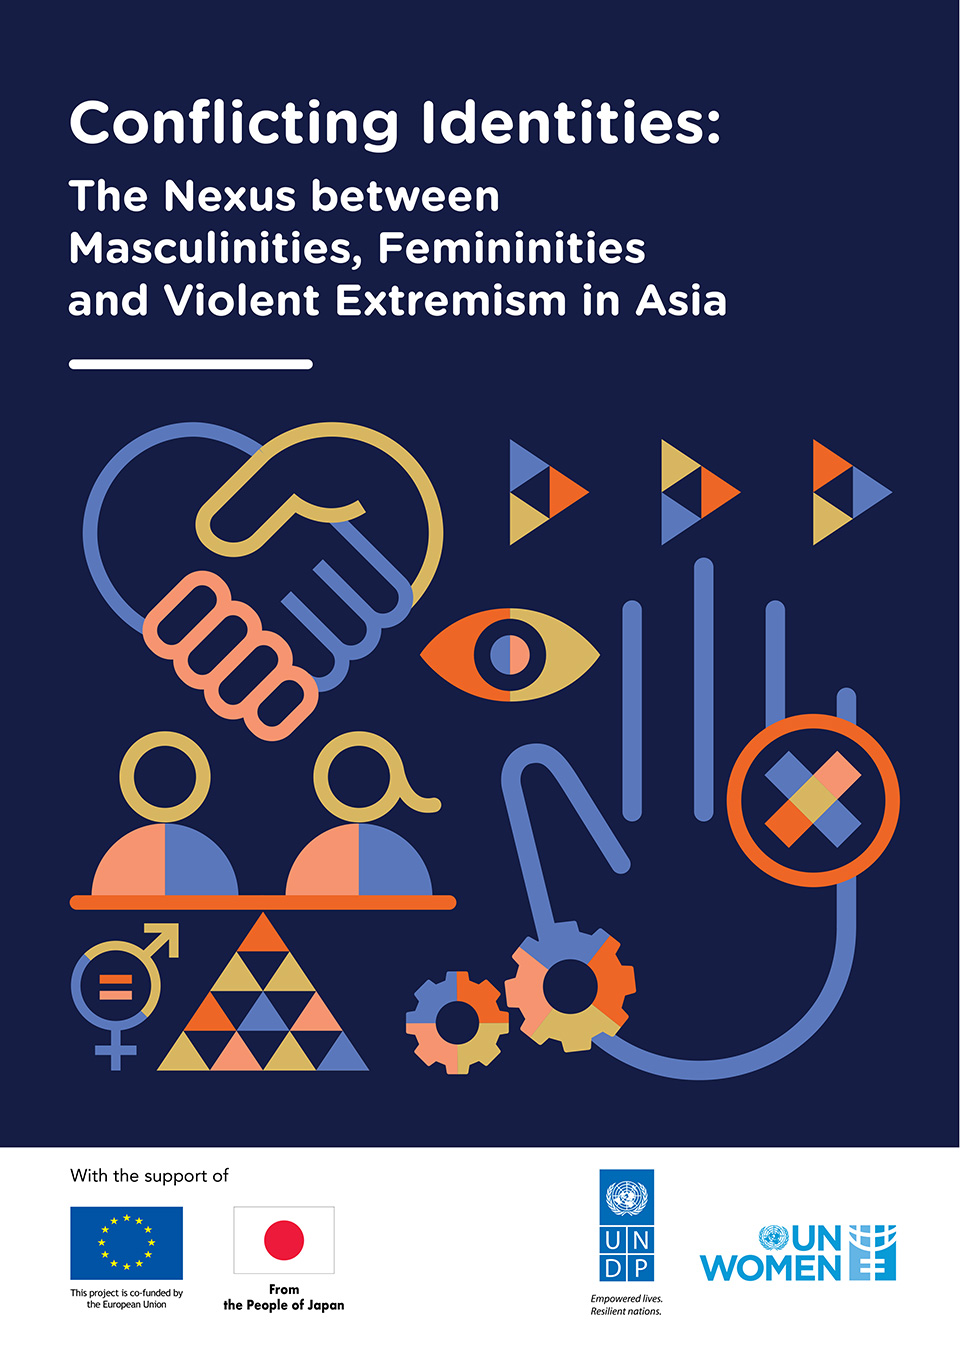 Conflicting Identities: The Nexus between Masculinities, Femininities and Violent Extremism in Asia